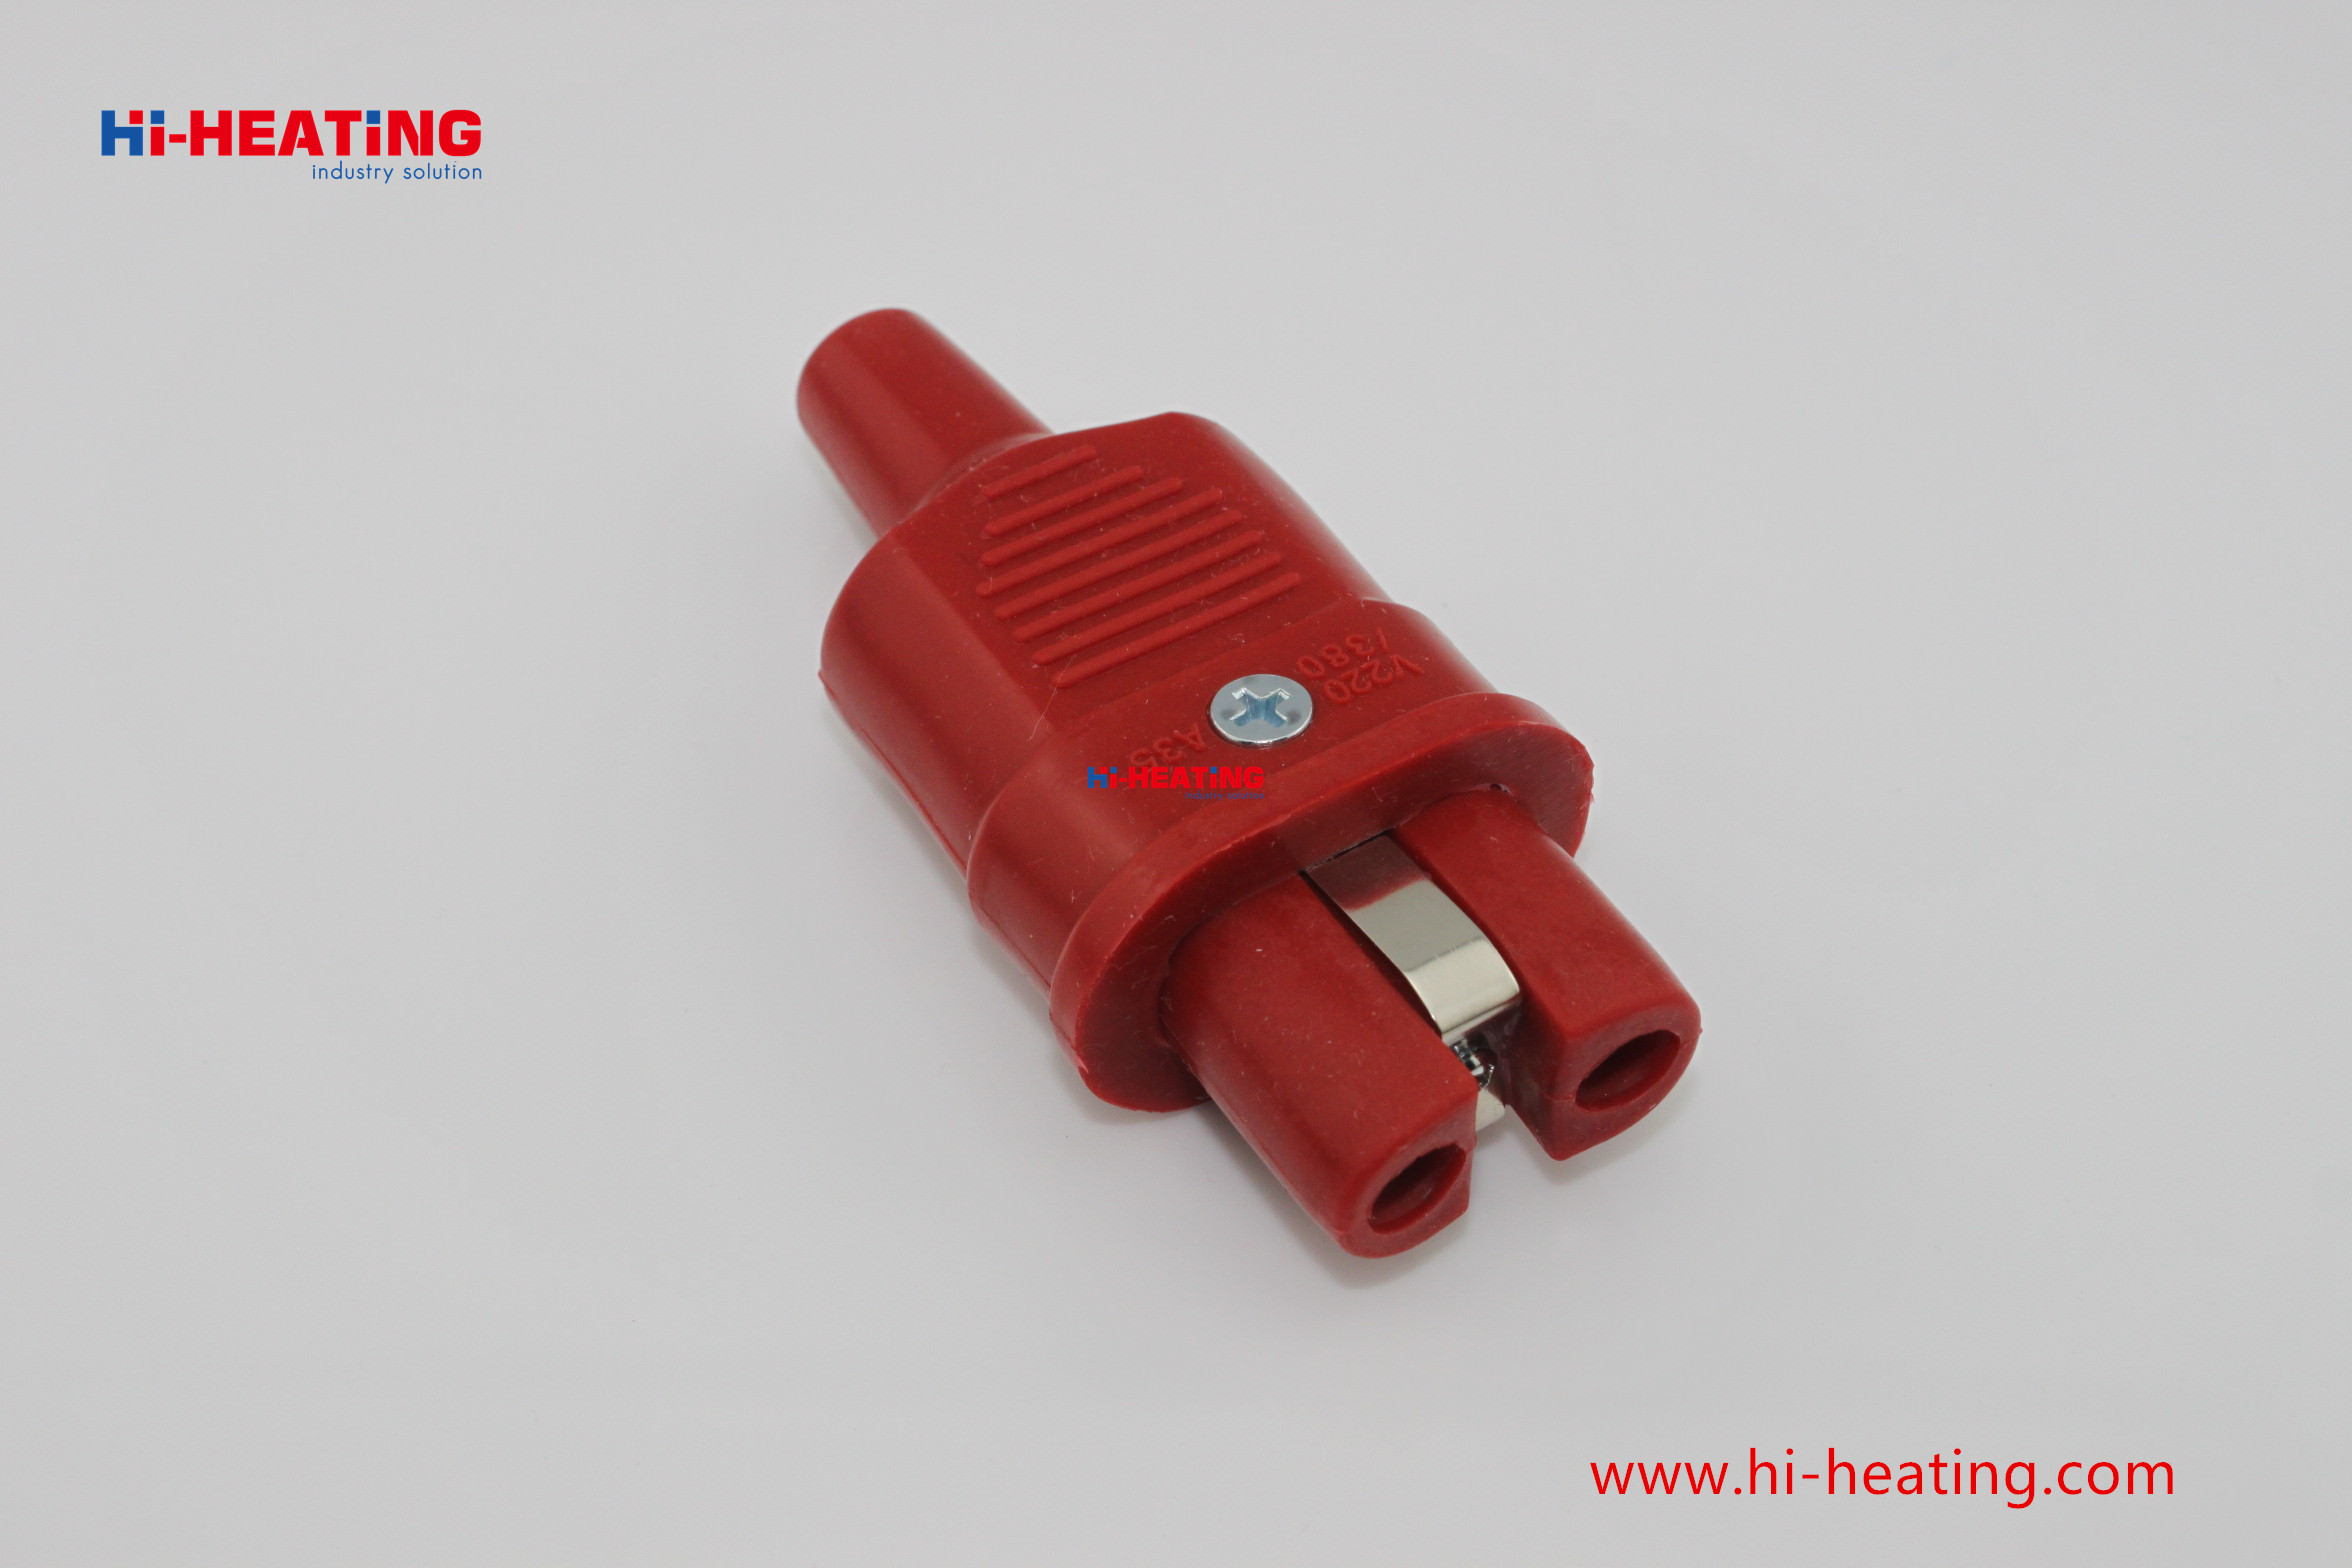 2022 years hot sales high temperature silicon plug good quality